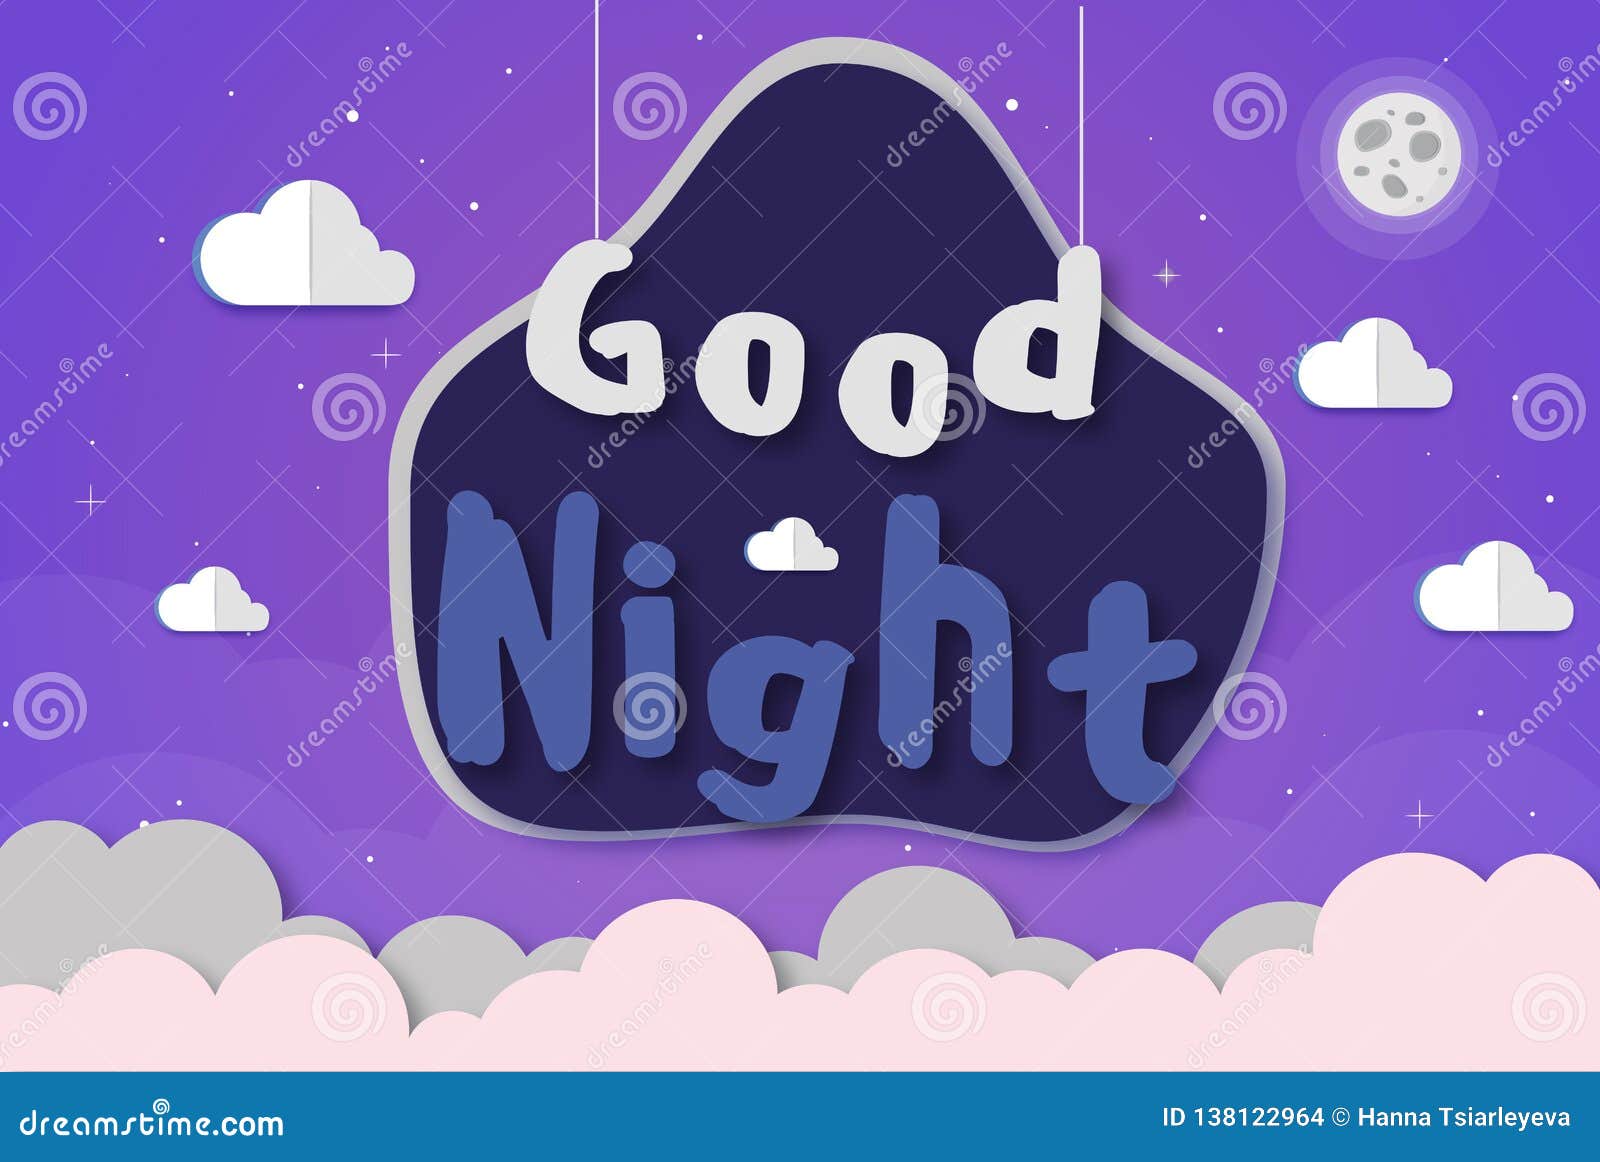 Paper Art of Goodnight and Sweet Dream, Night Paper Cloud and Moon with ...